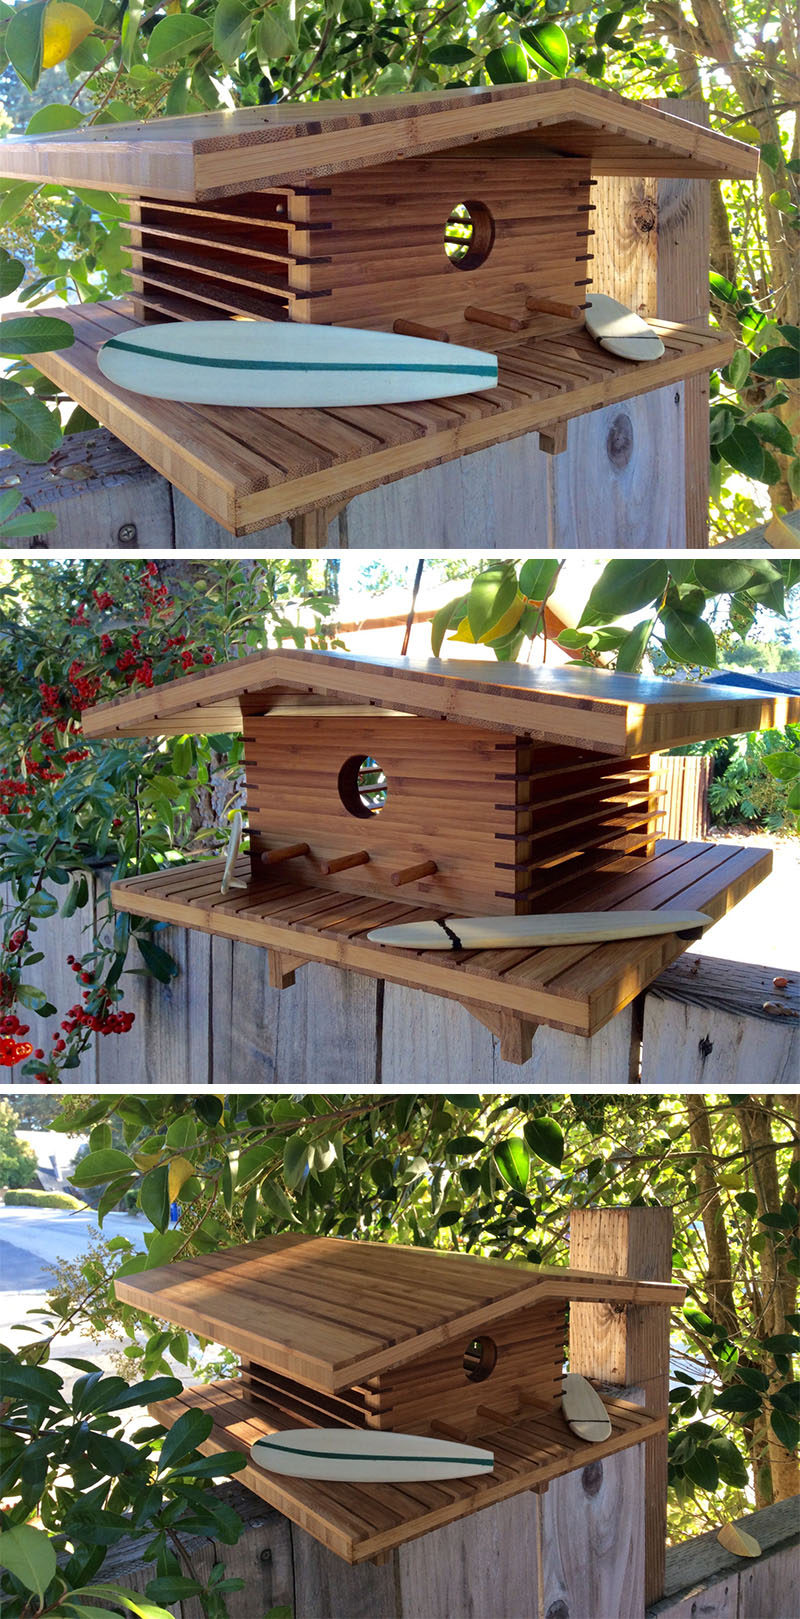 Designed by Douglas Barnhard, this bamboo and teak birdhouse was inspired by Hawaiian architecture.